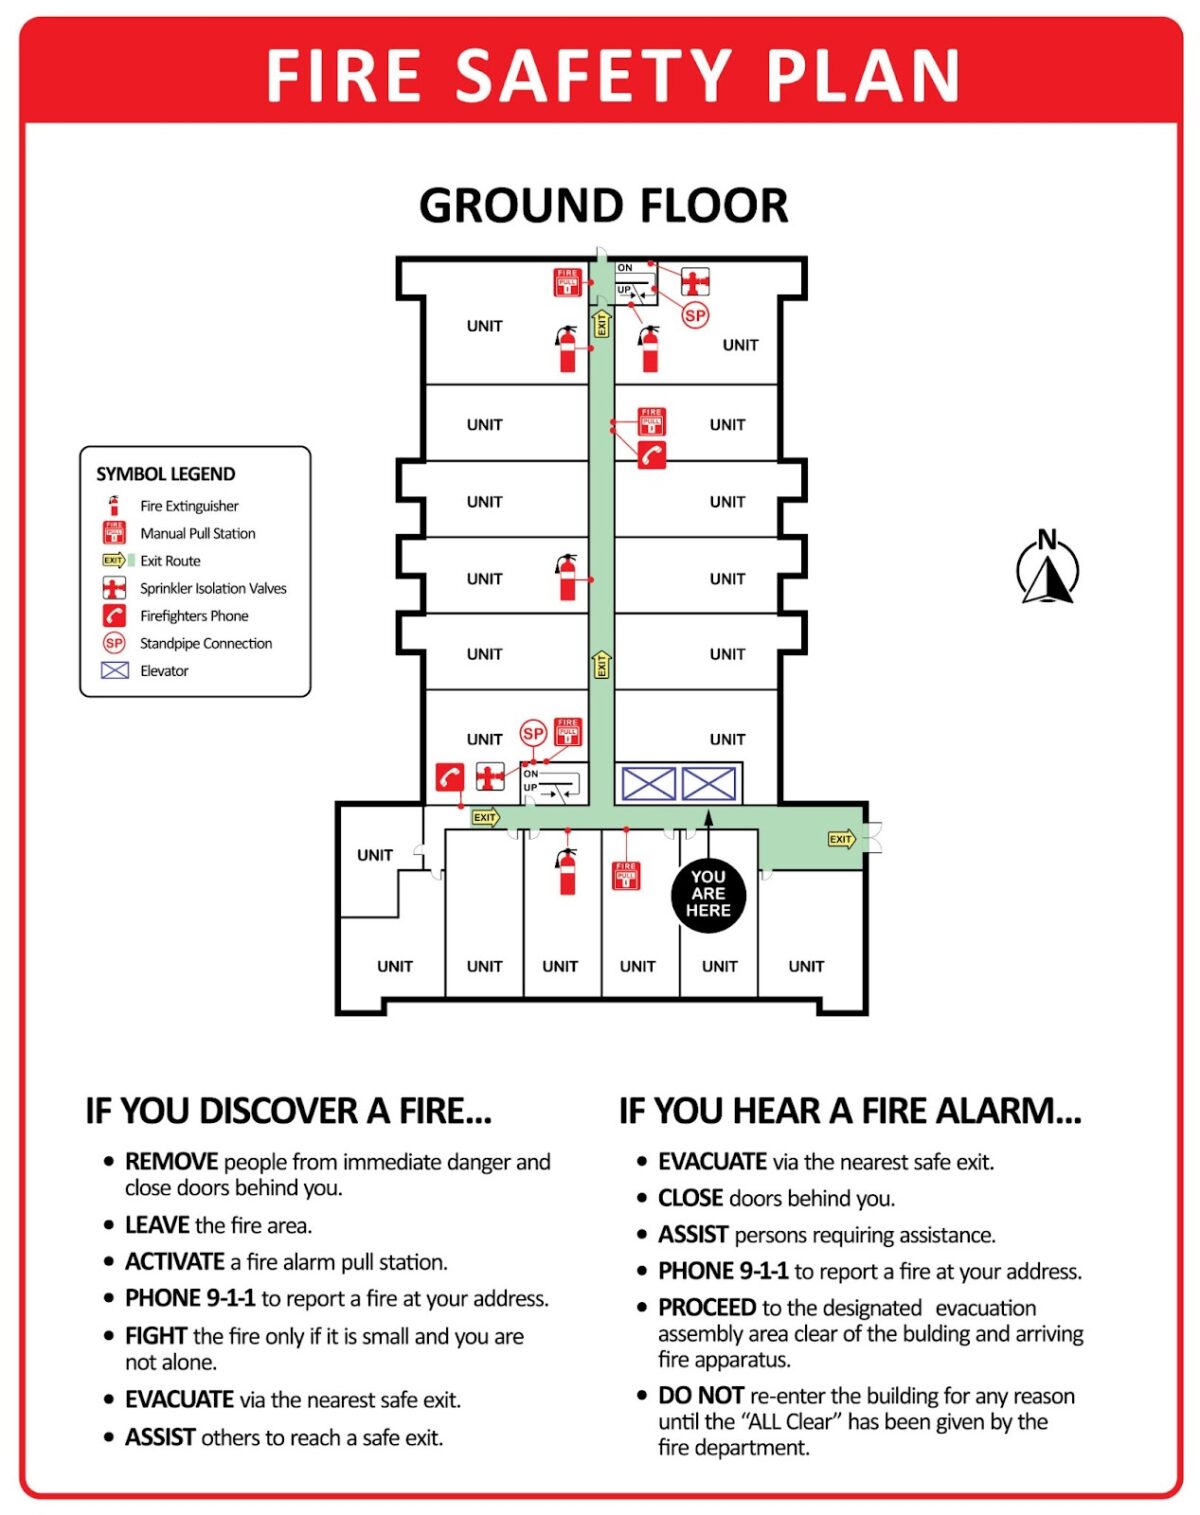 A fire safety plan infographic